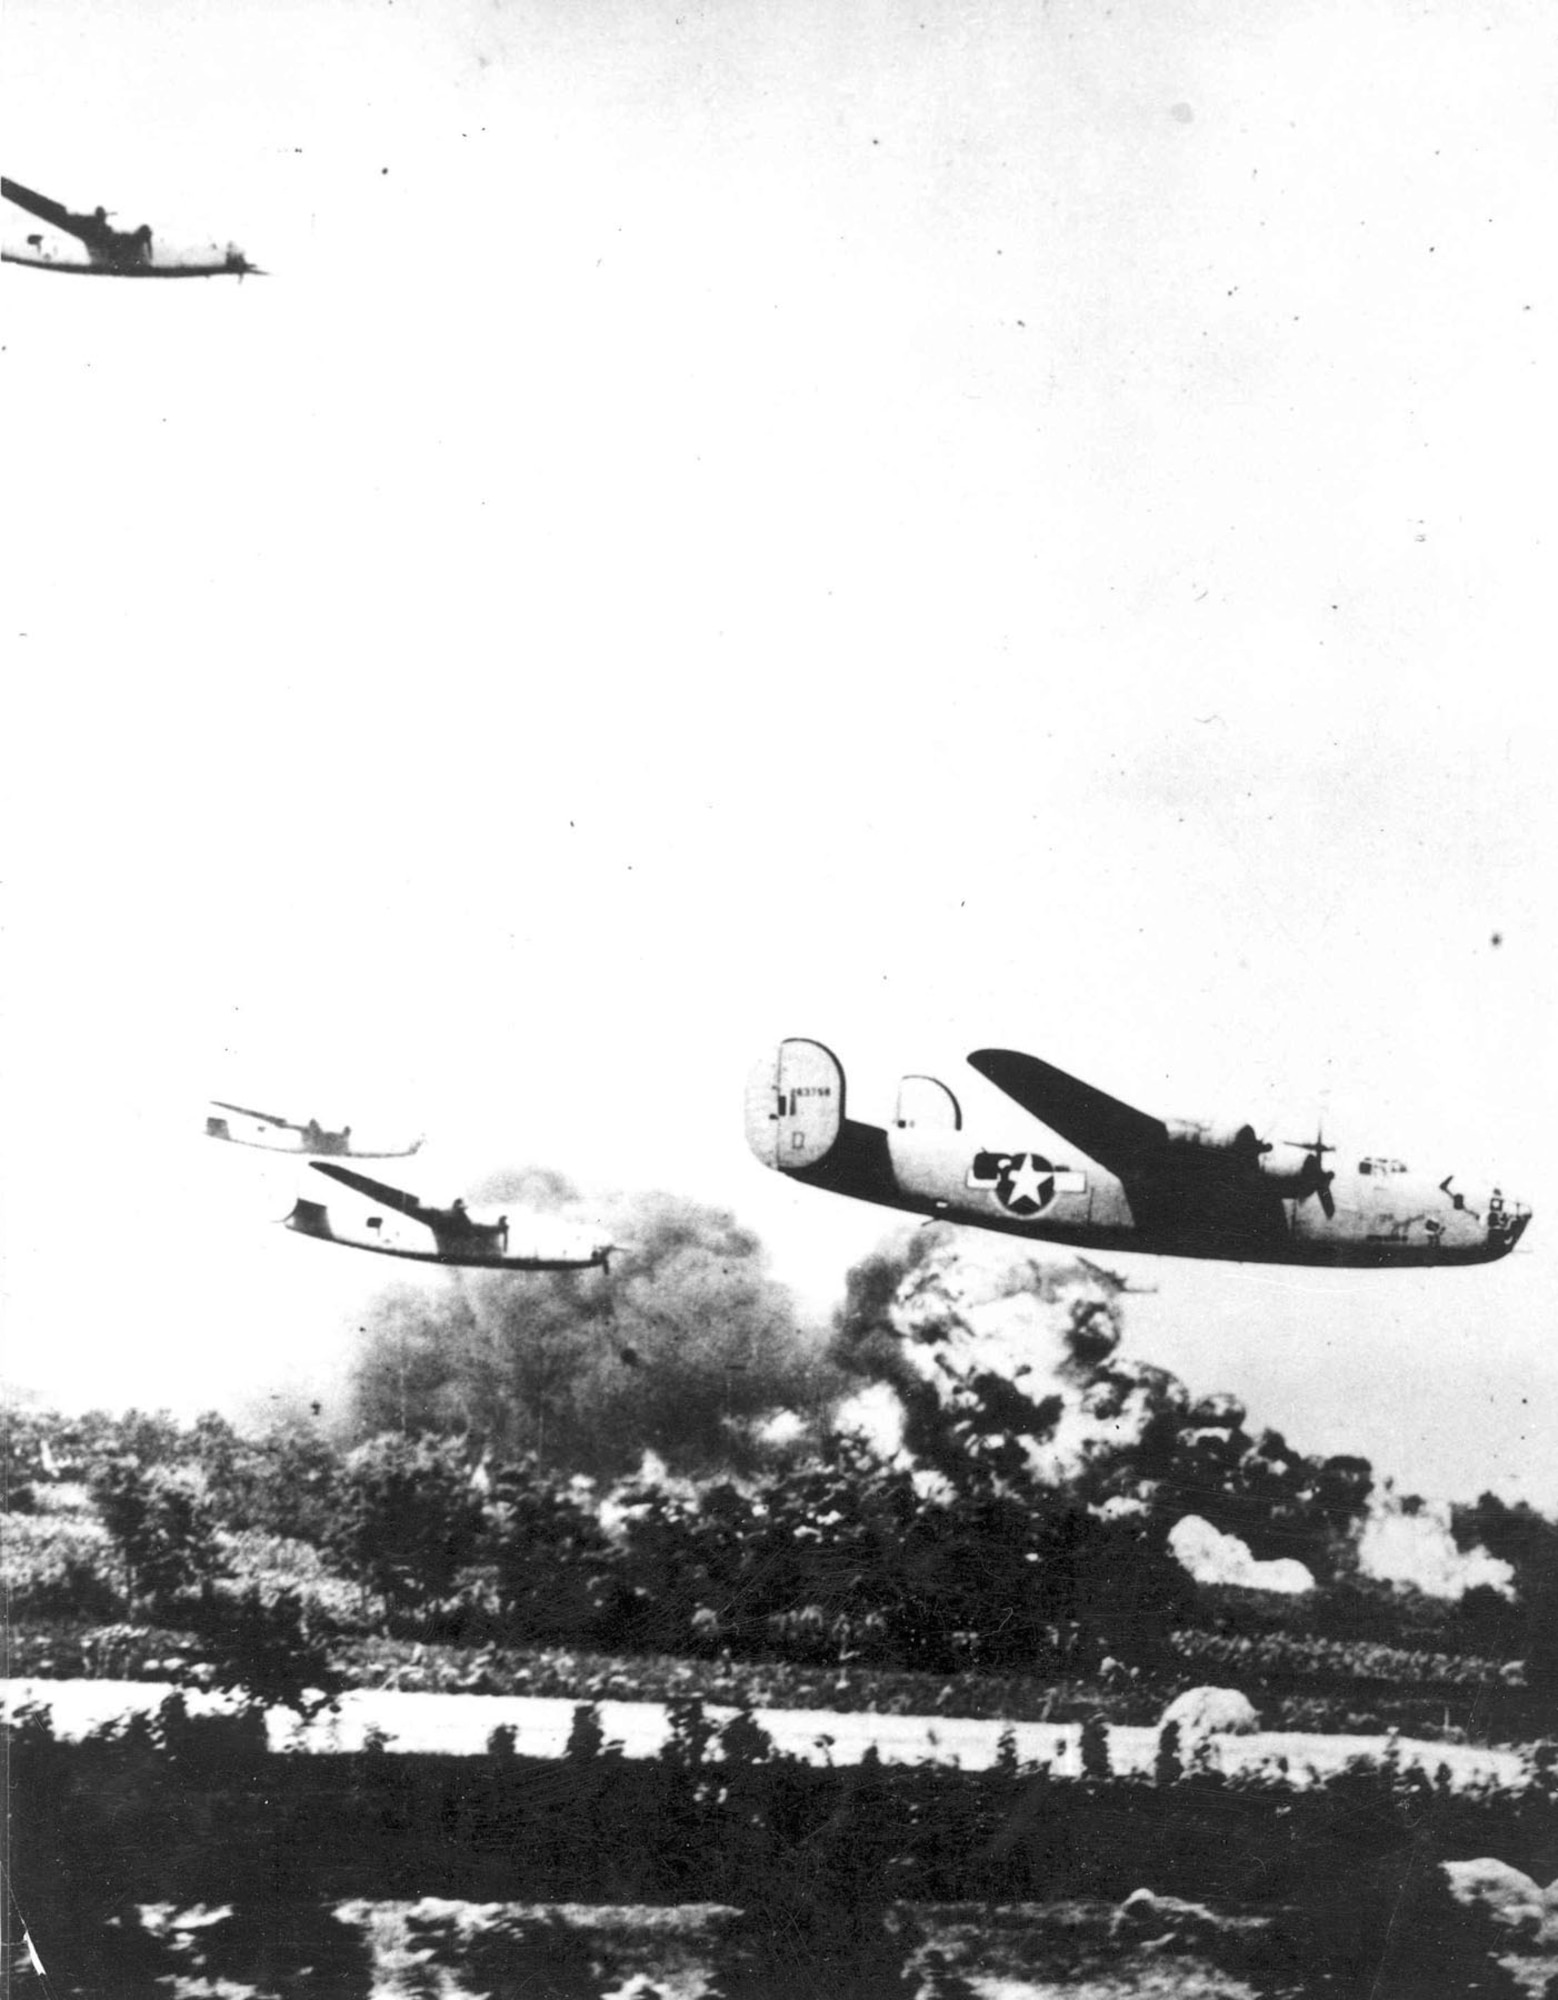 Consolidated B-24s on the Ploesti oil refinery bombing mission. (U.S. Air Force photo)